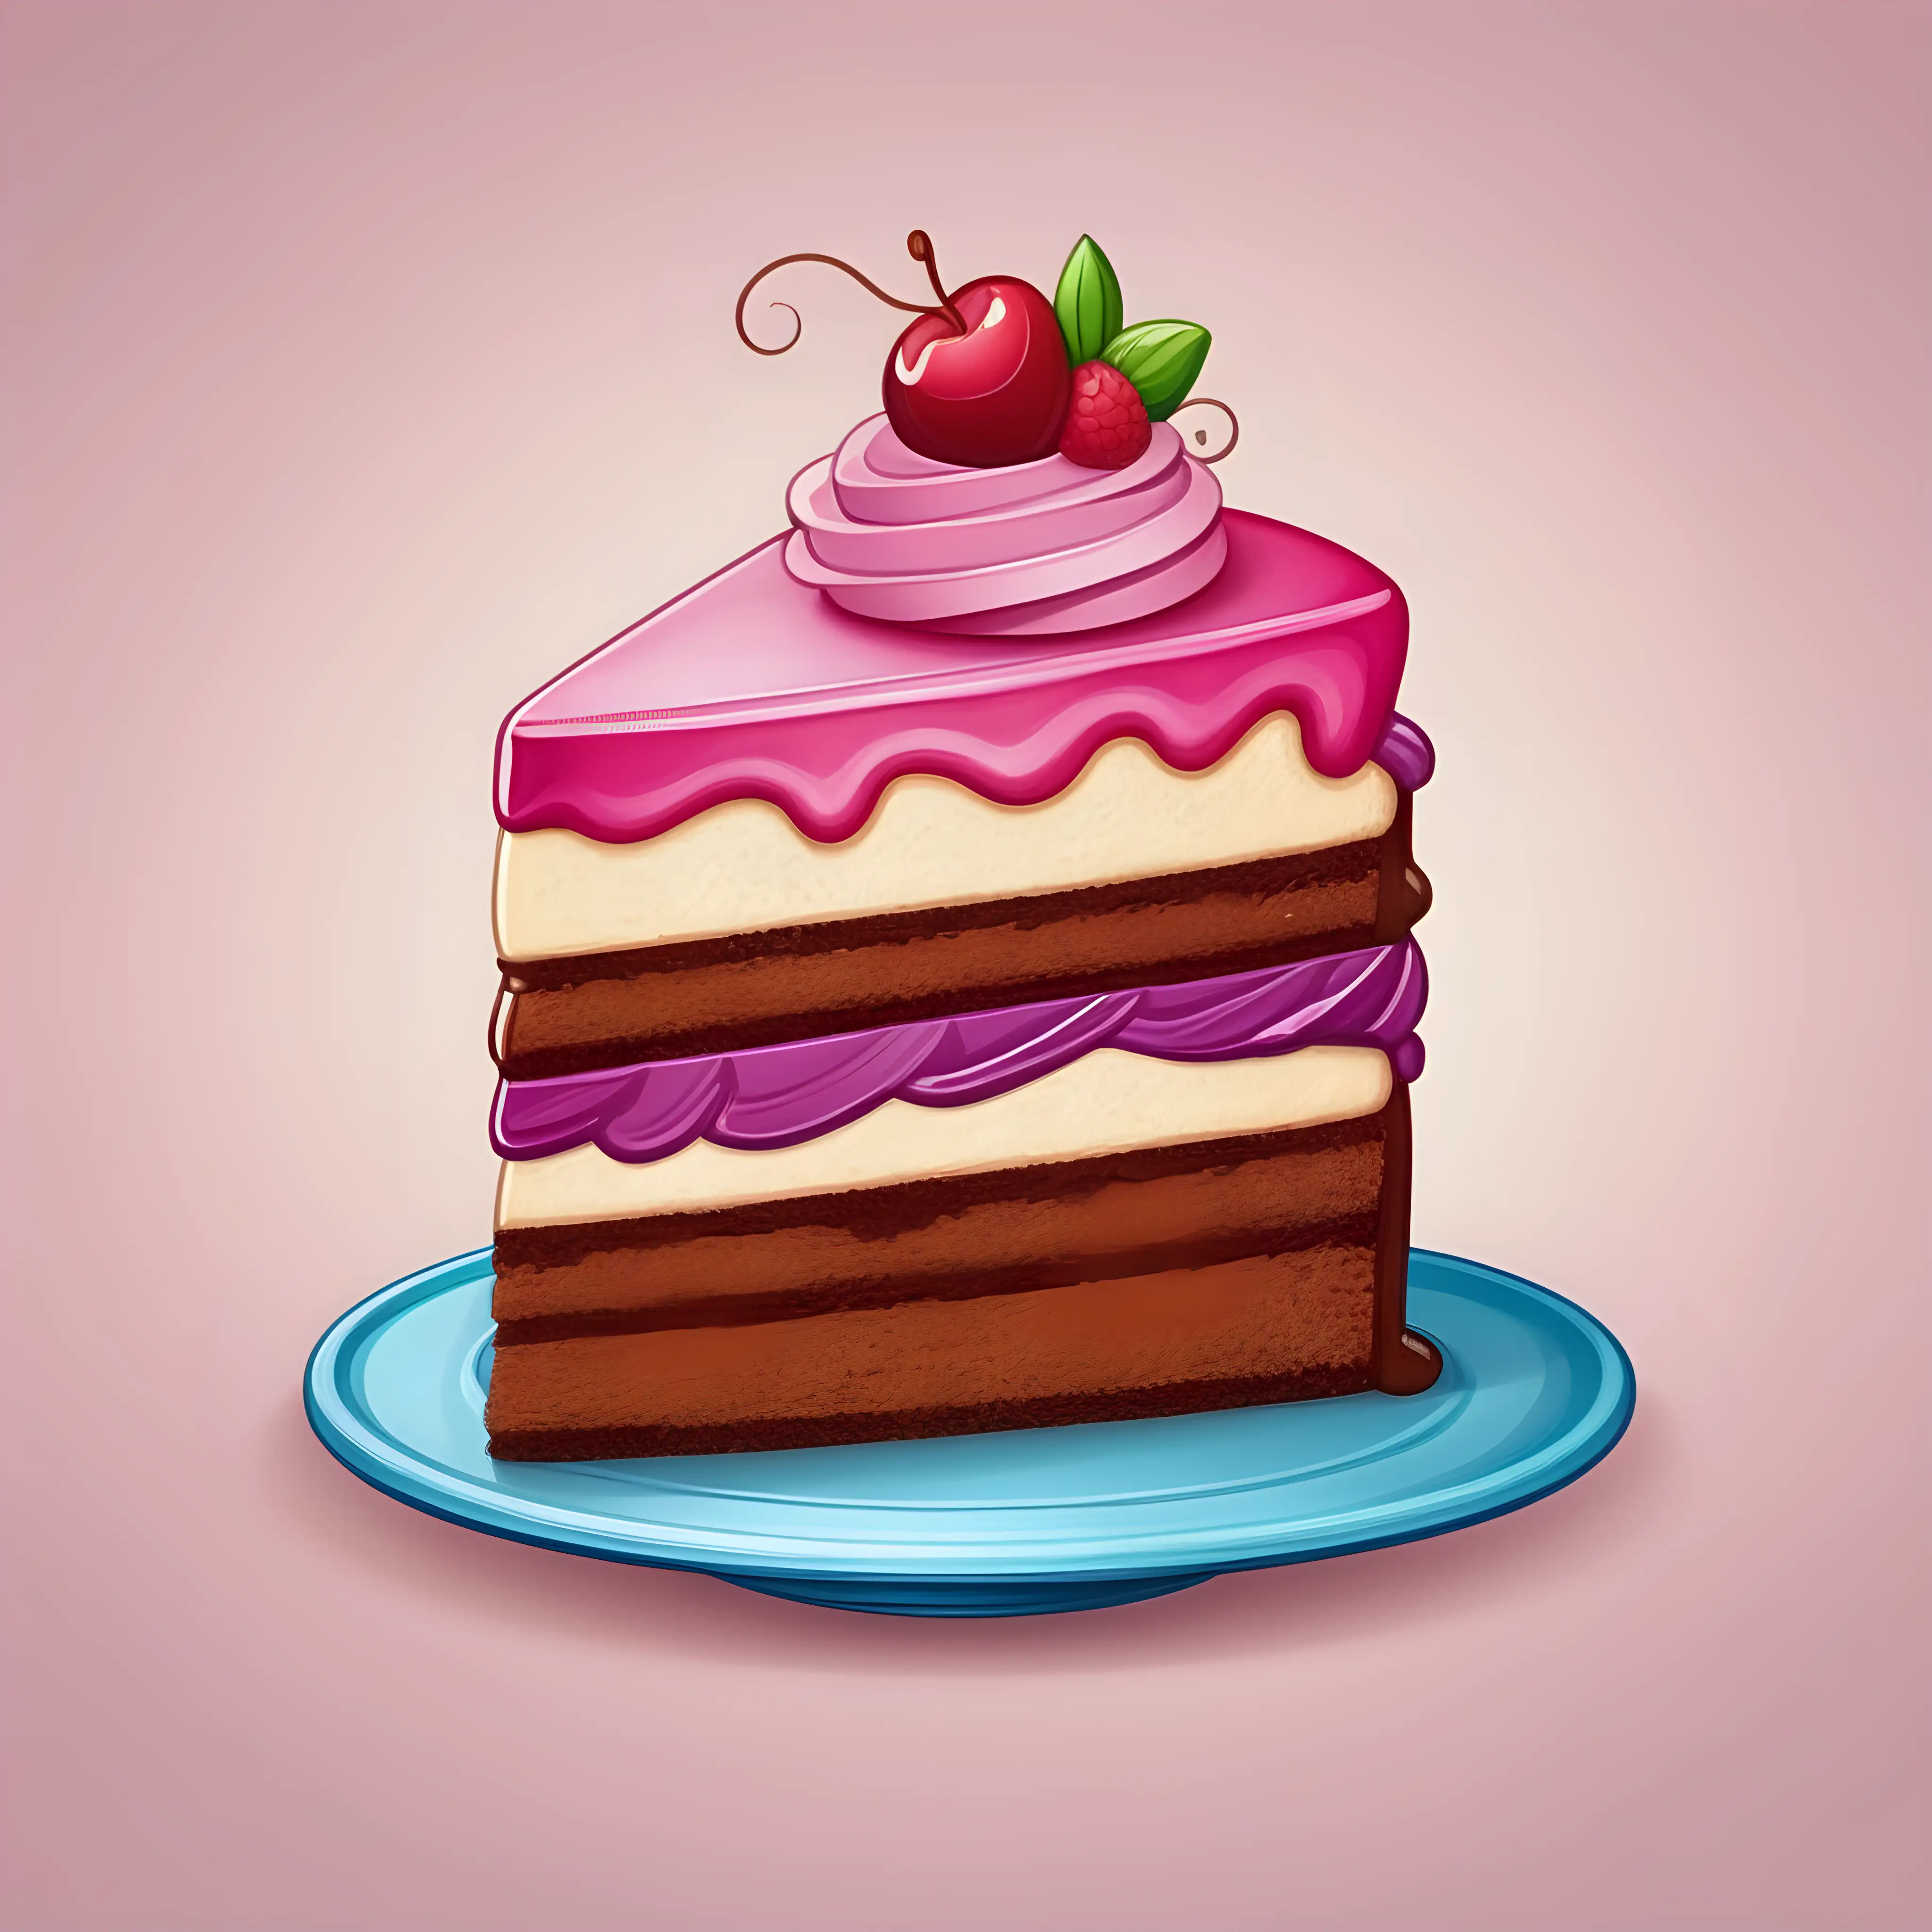 Delicious Cartoon Cake Icon for Sweet Celebrations